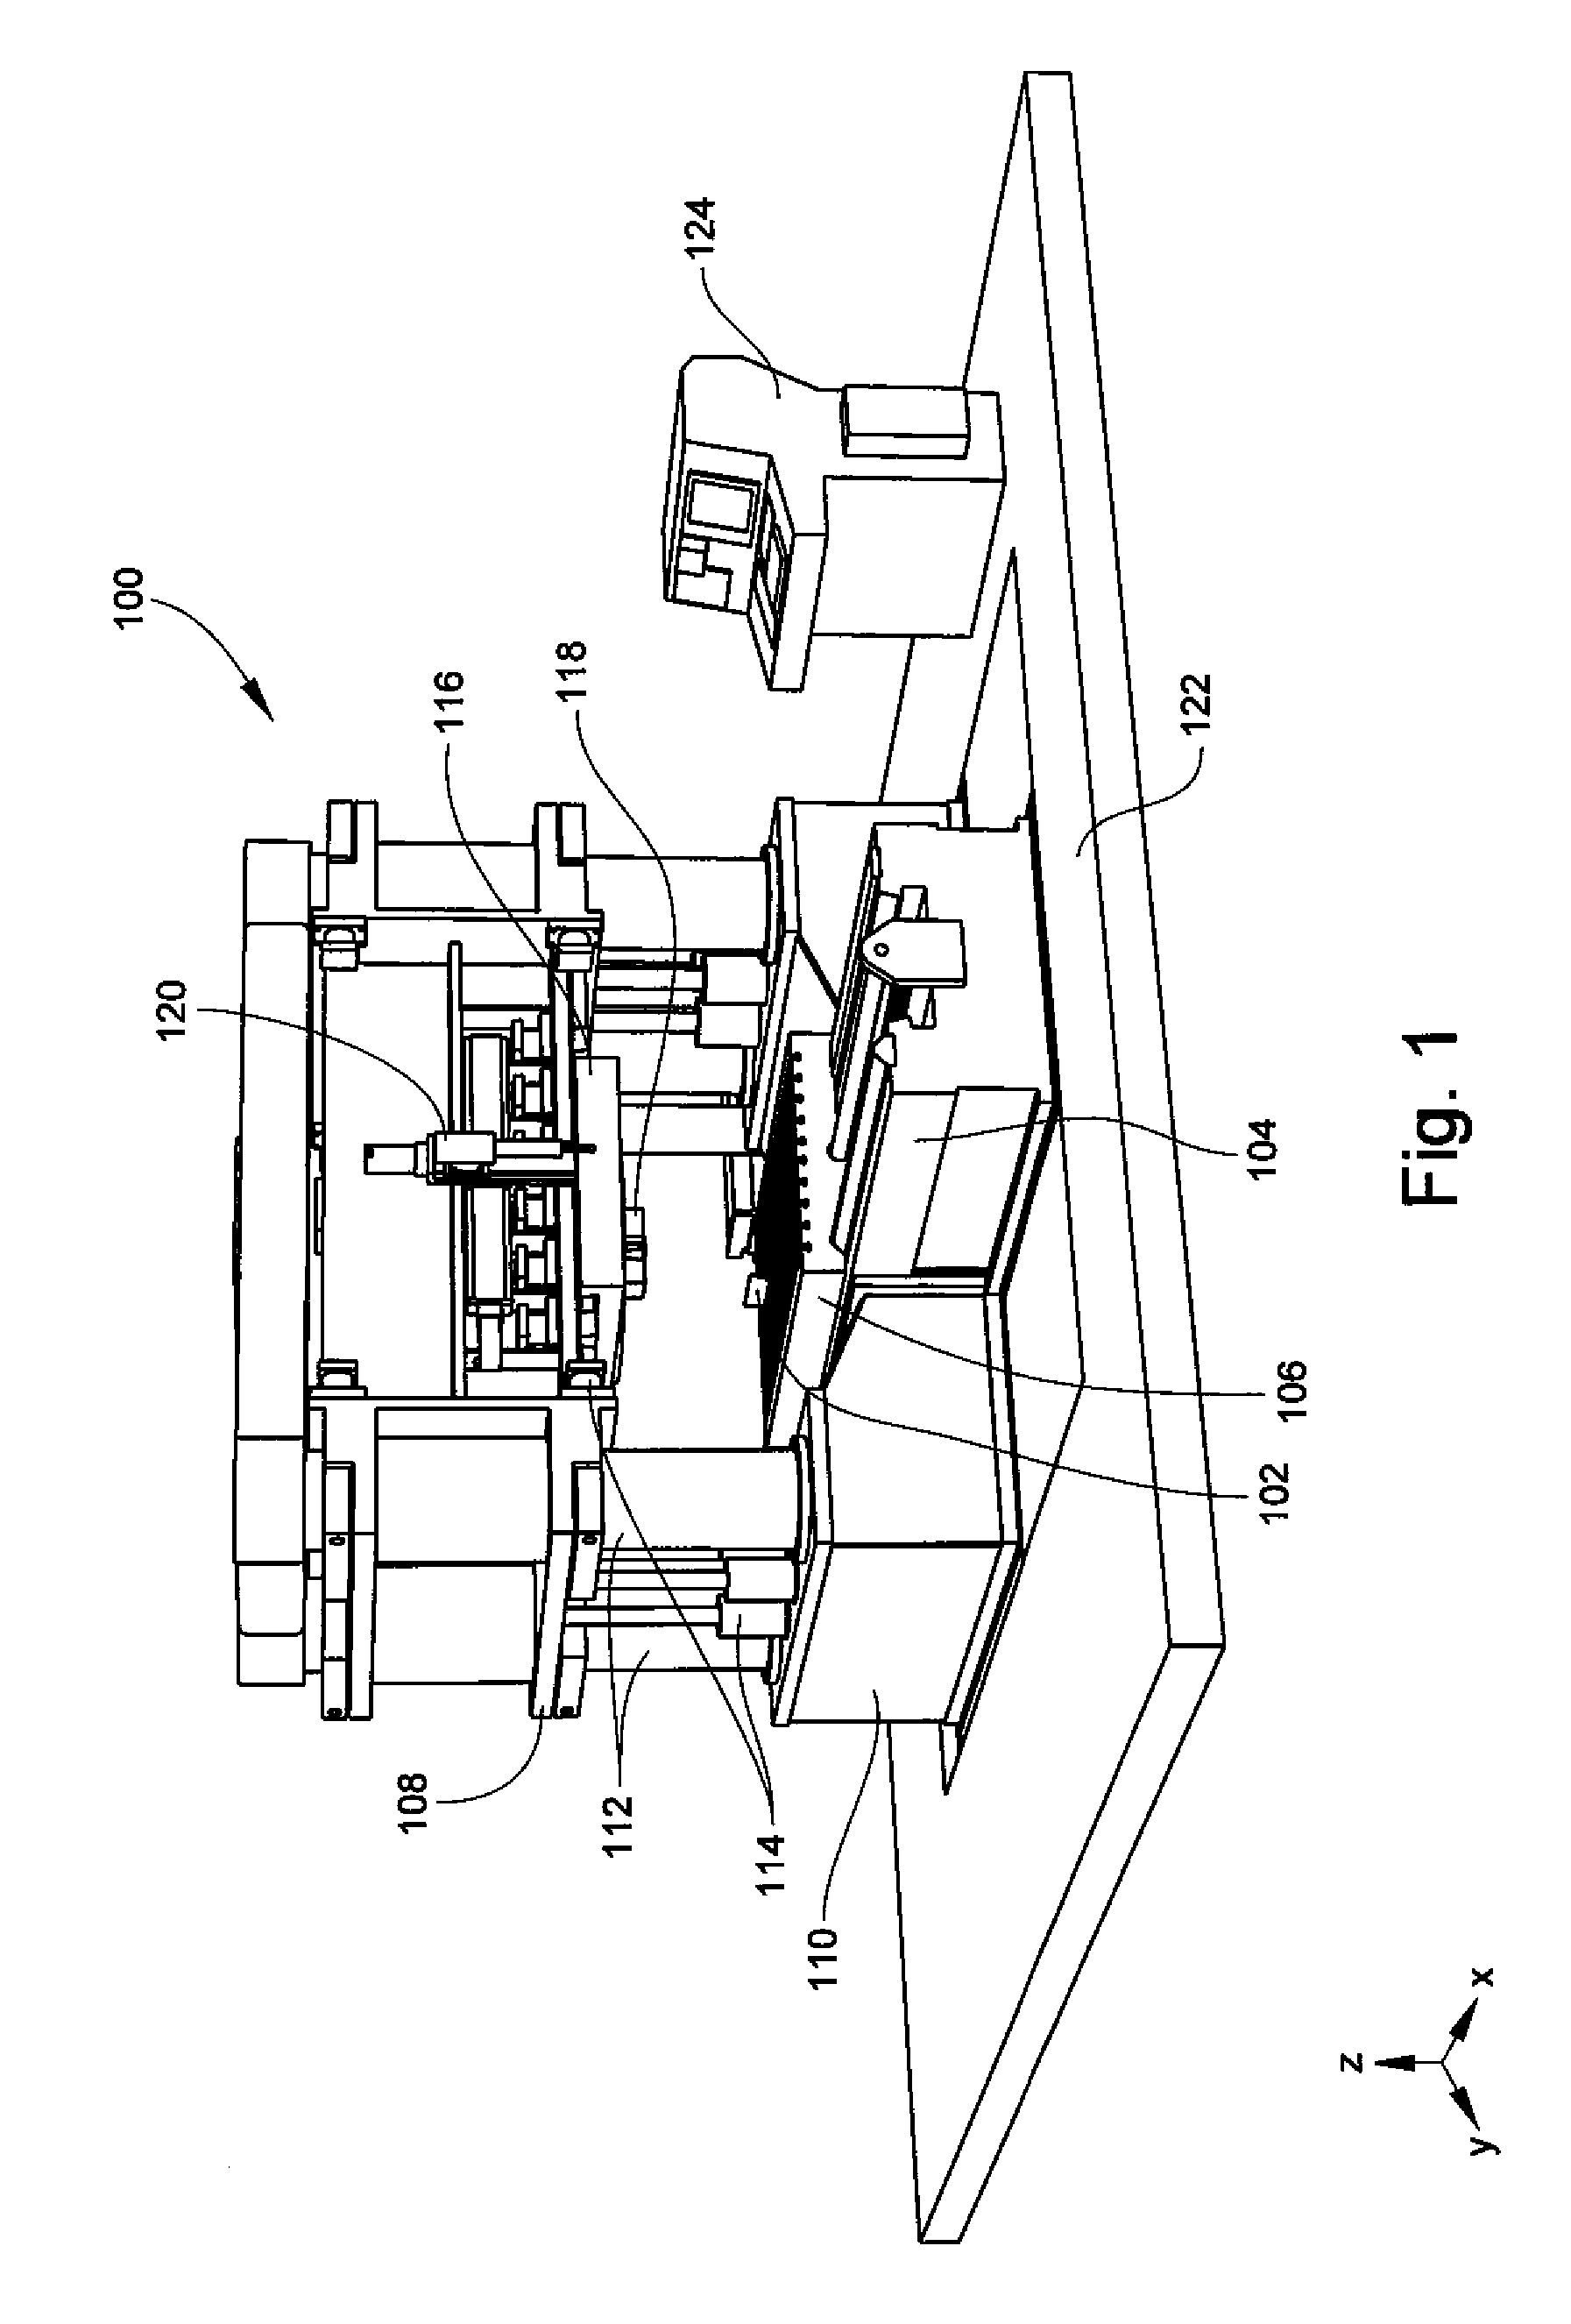 Linear friction welding apparatus and method